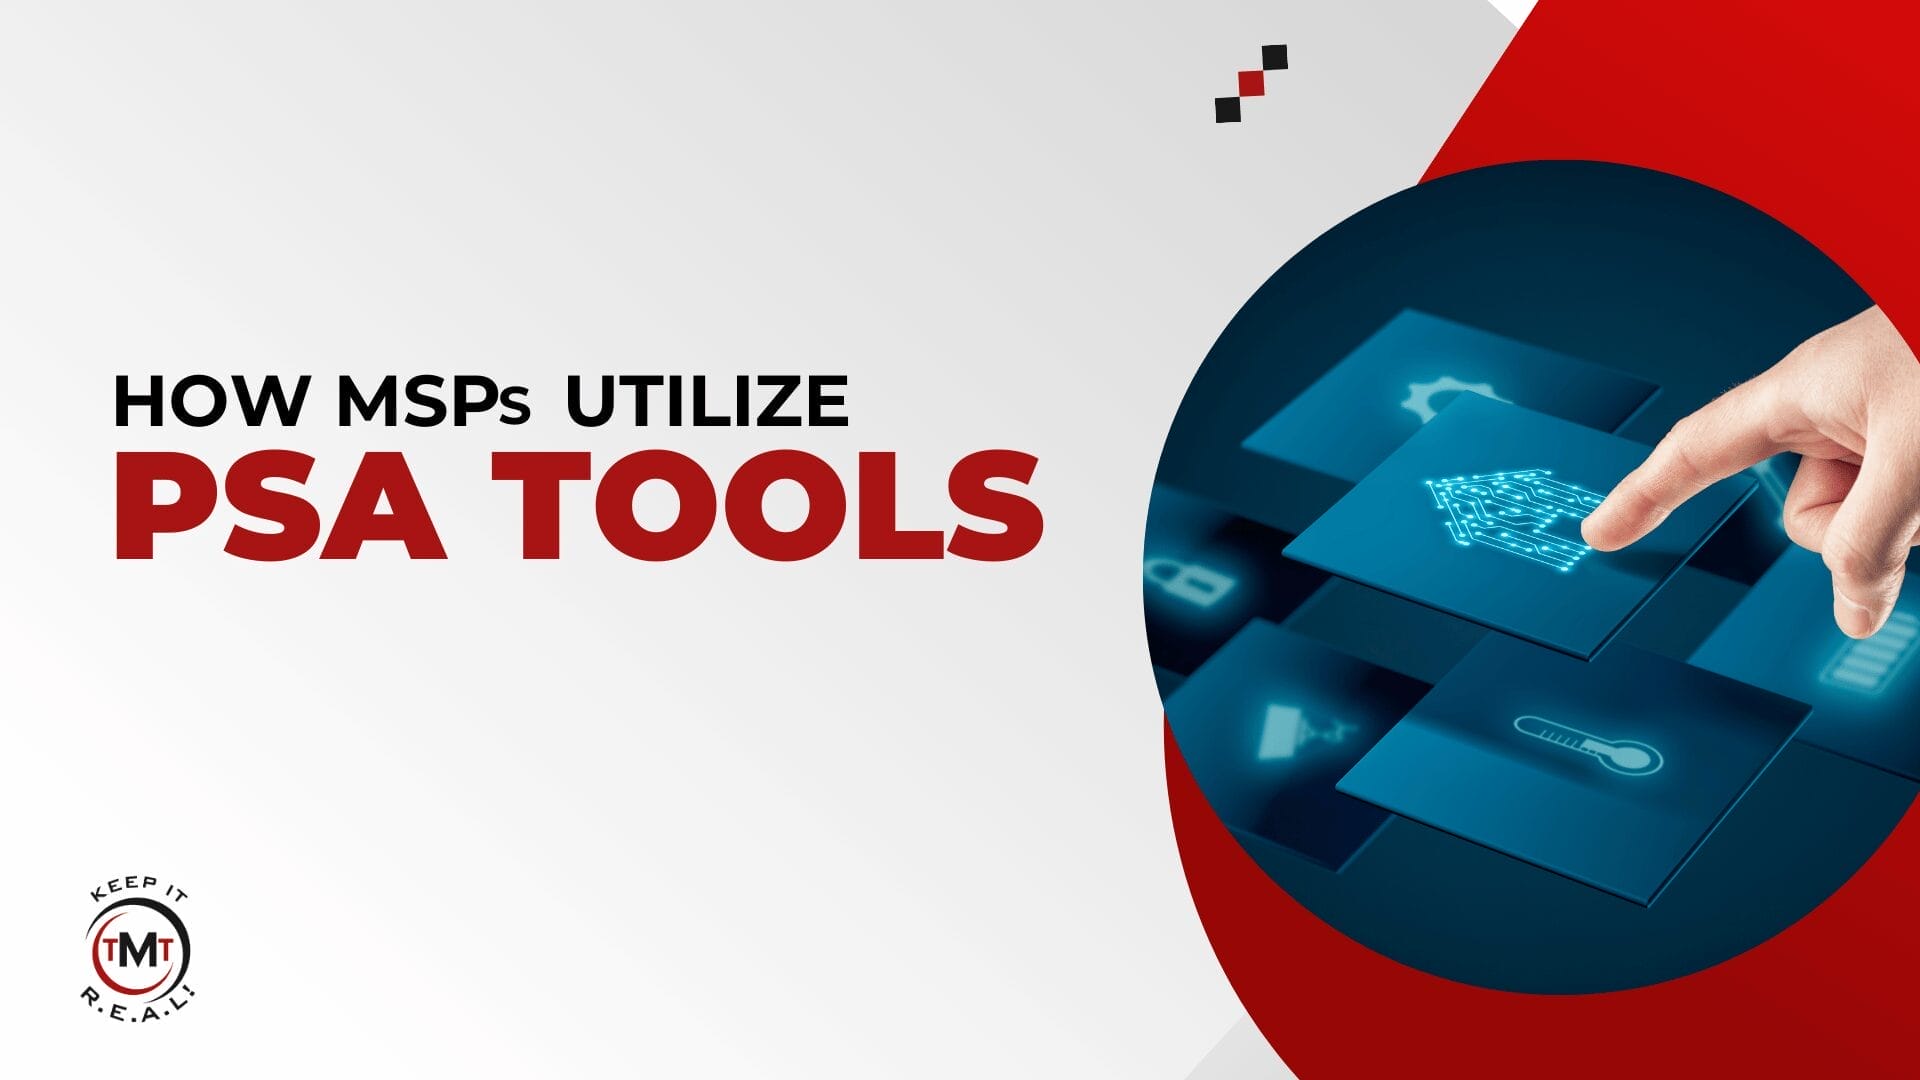 Featured image for “How MSPs Utilize PSA Tools”